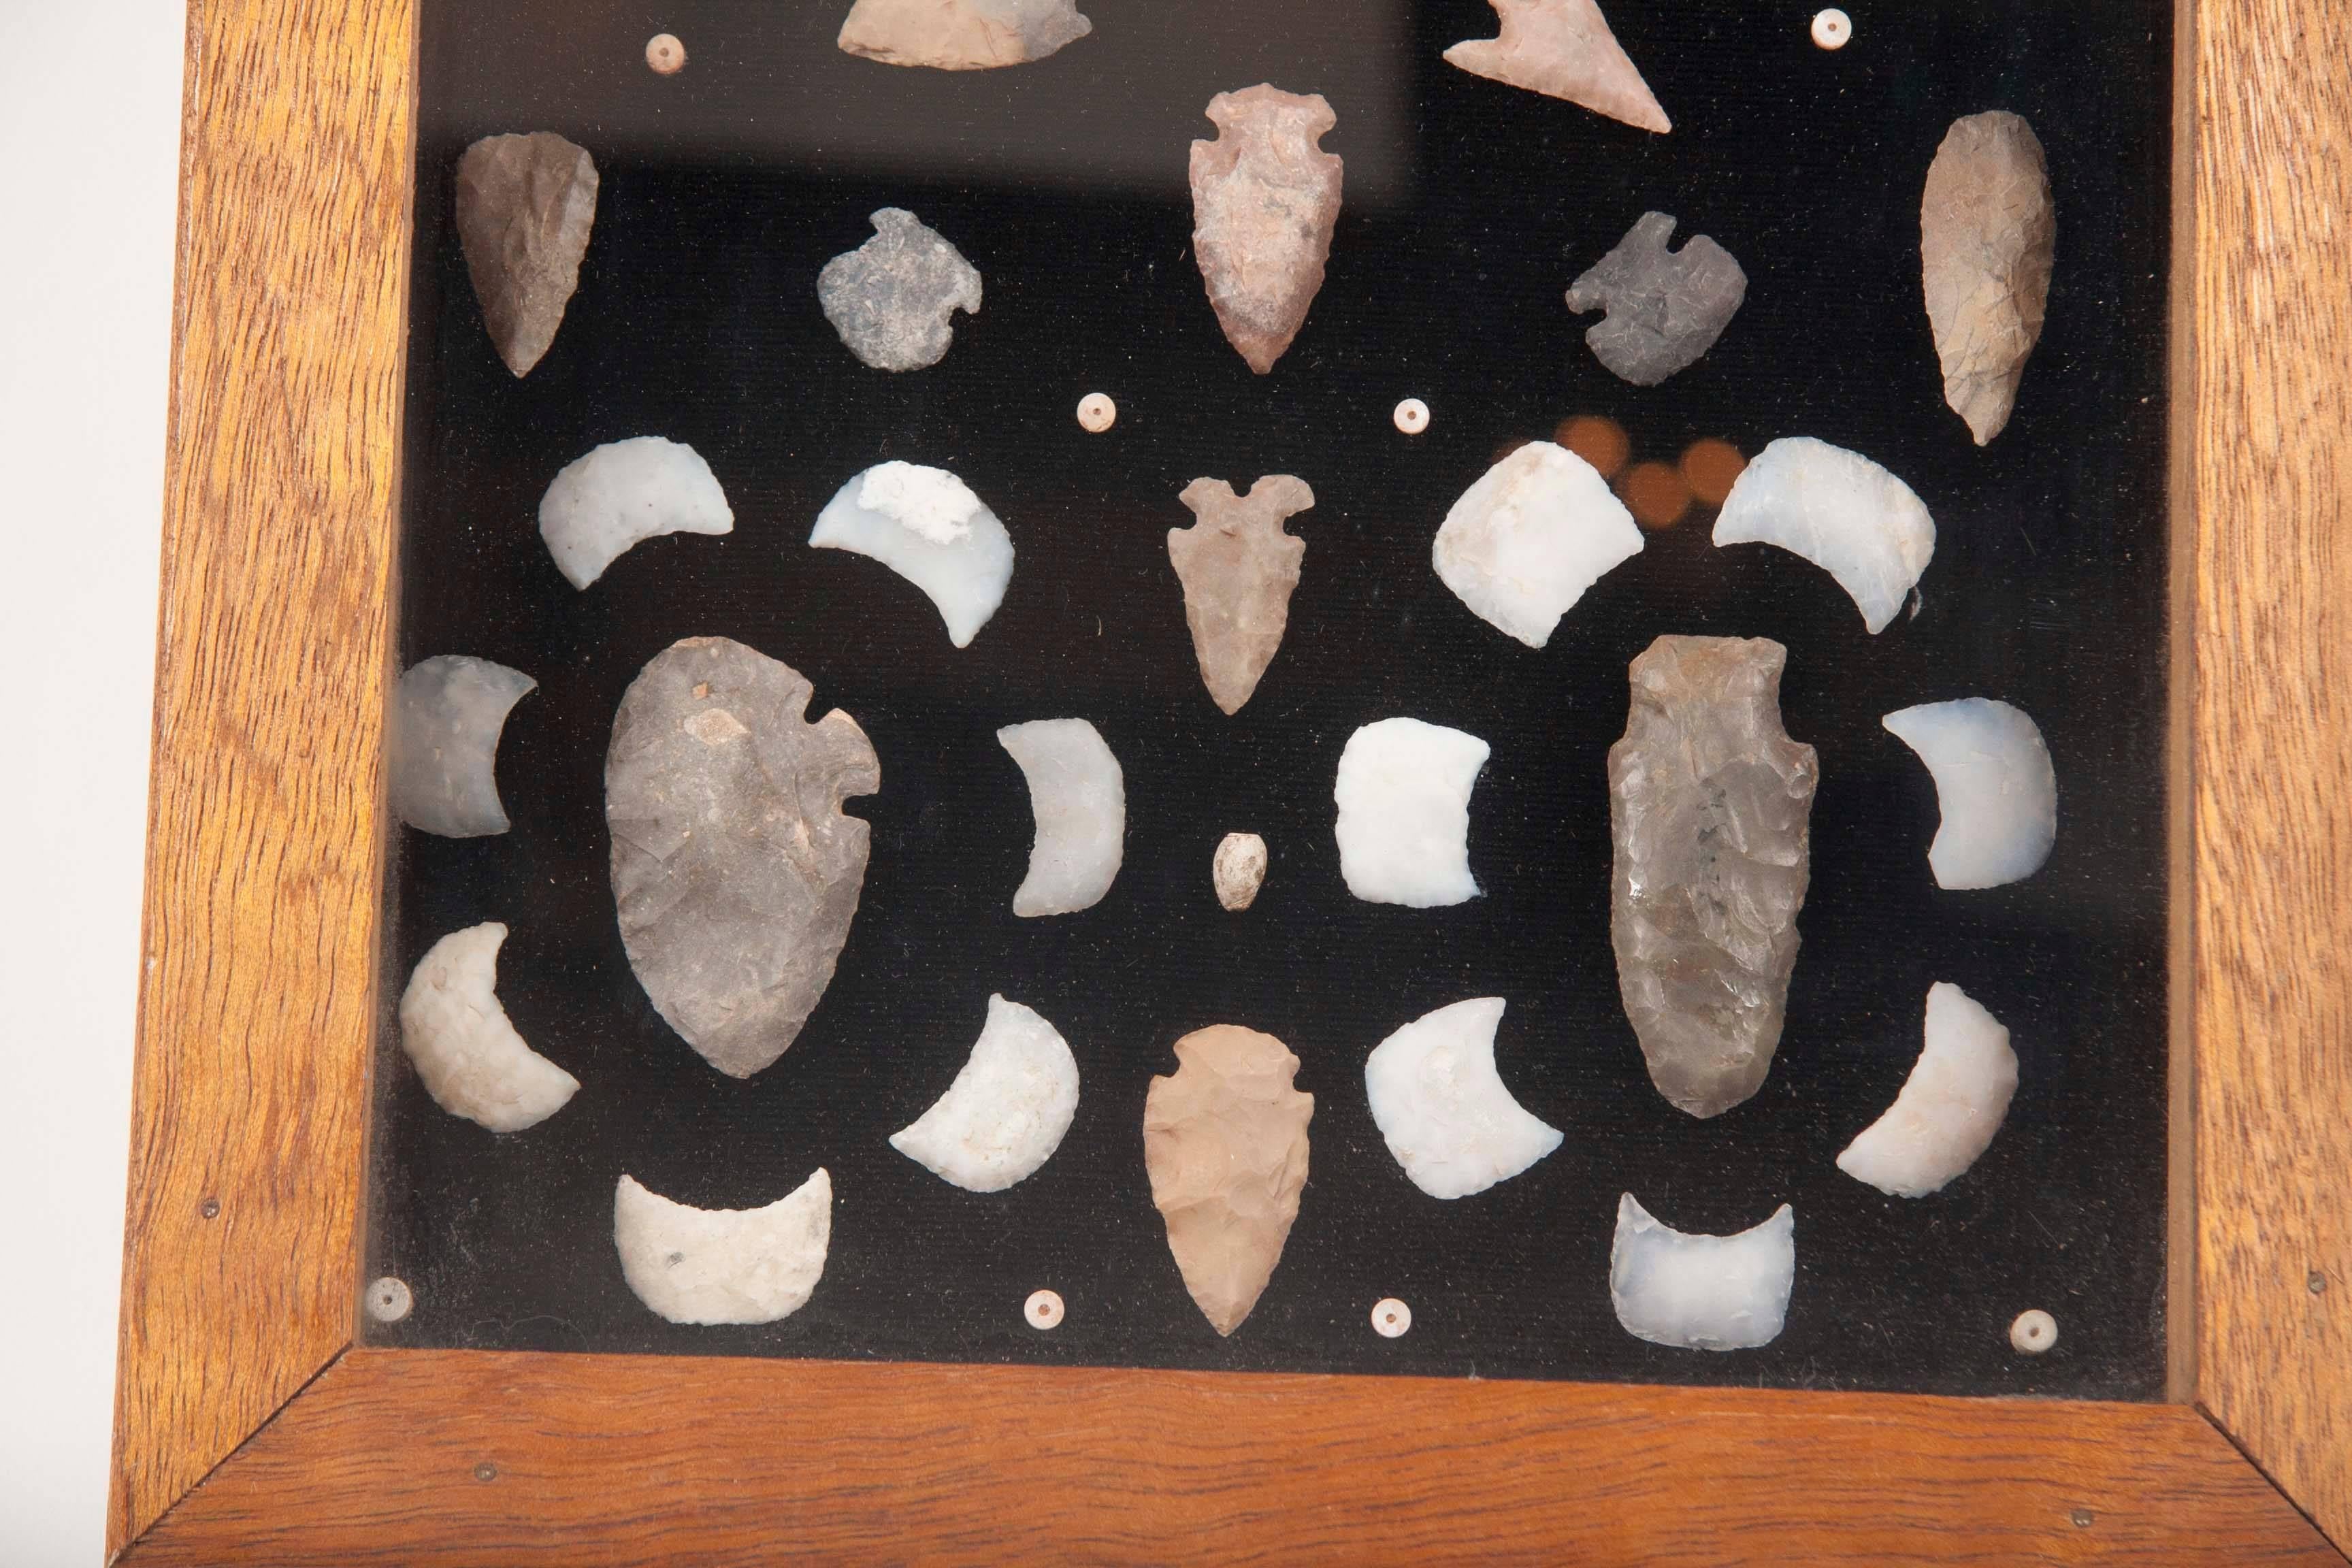 American Indian Arrowhead and Artifact Collection 2